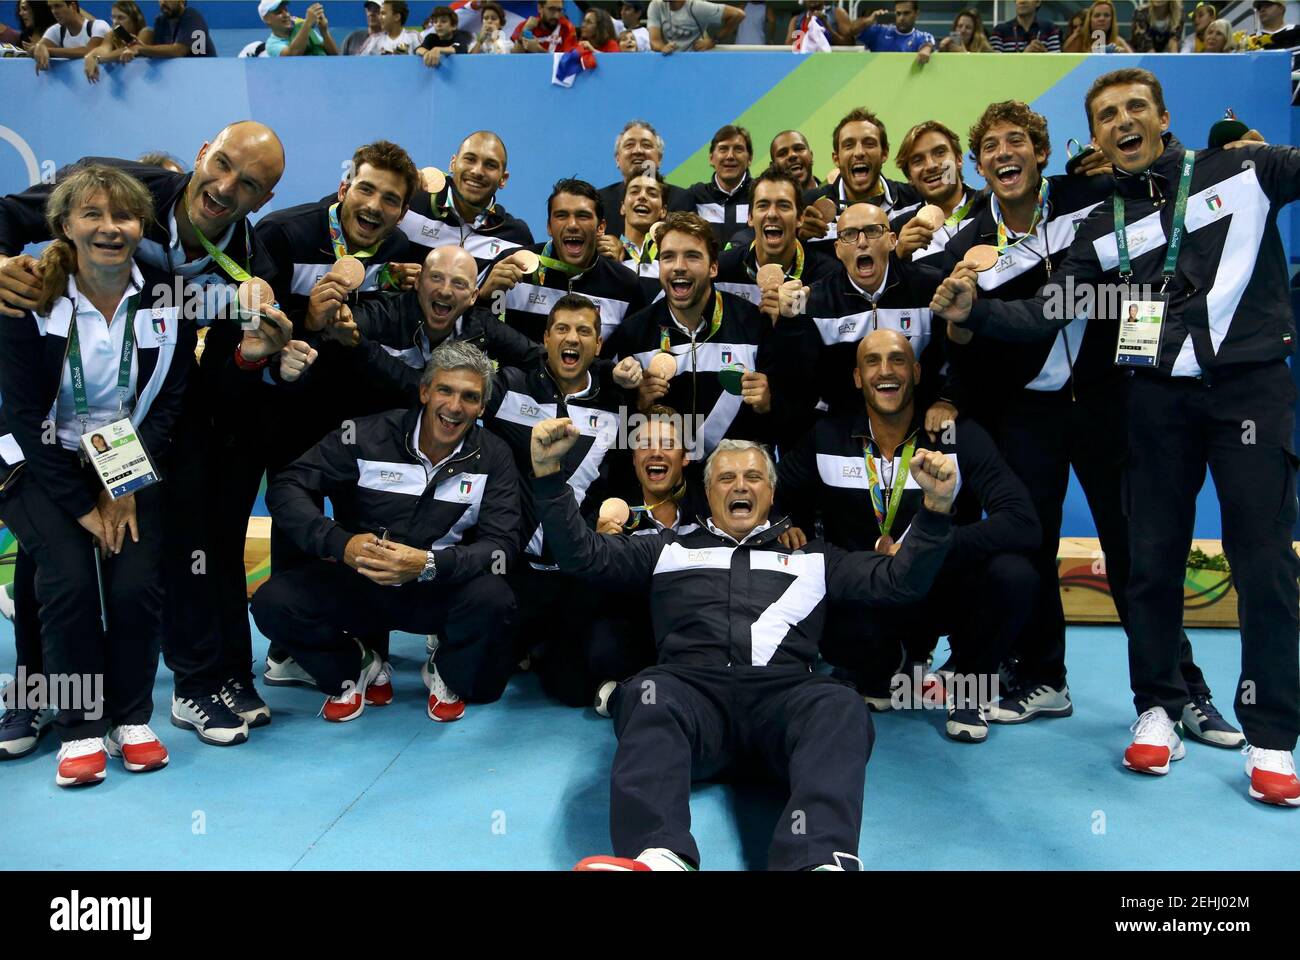 2016 Rio Olympics - Water Polo - Victory Ceremony - Men's Victory Ceremony - Olympic Aquatics Stadium - Rio de Janeiro, Brazil - 20/08/2016. Members of the Italy team pose with their bronze medals.      REUTERS/Damir Sagolj  FOR EDITORIAL USE ONLY. NOT FOR SALE FOR MARKETING OR ADVERTISING CAMPAIGNS.     Picture Supplied by Action Images Stock Photo